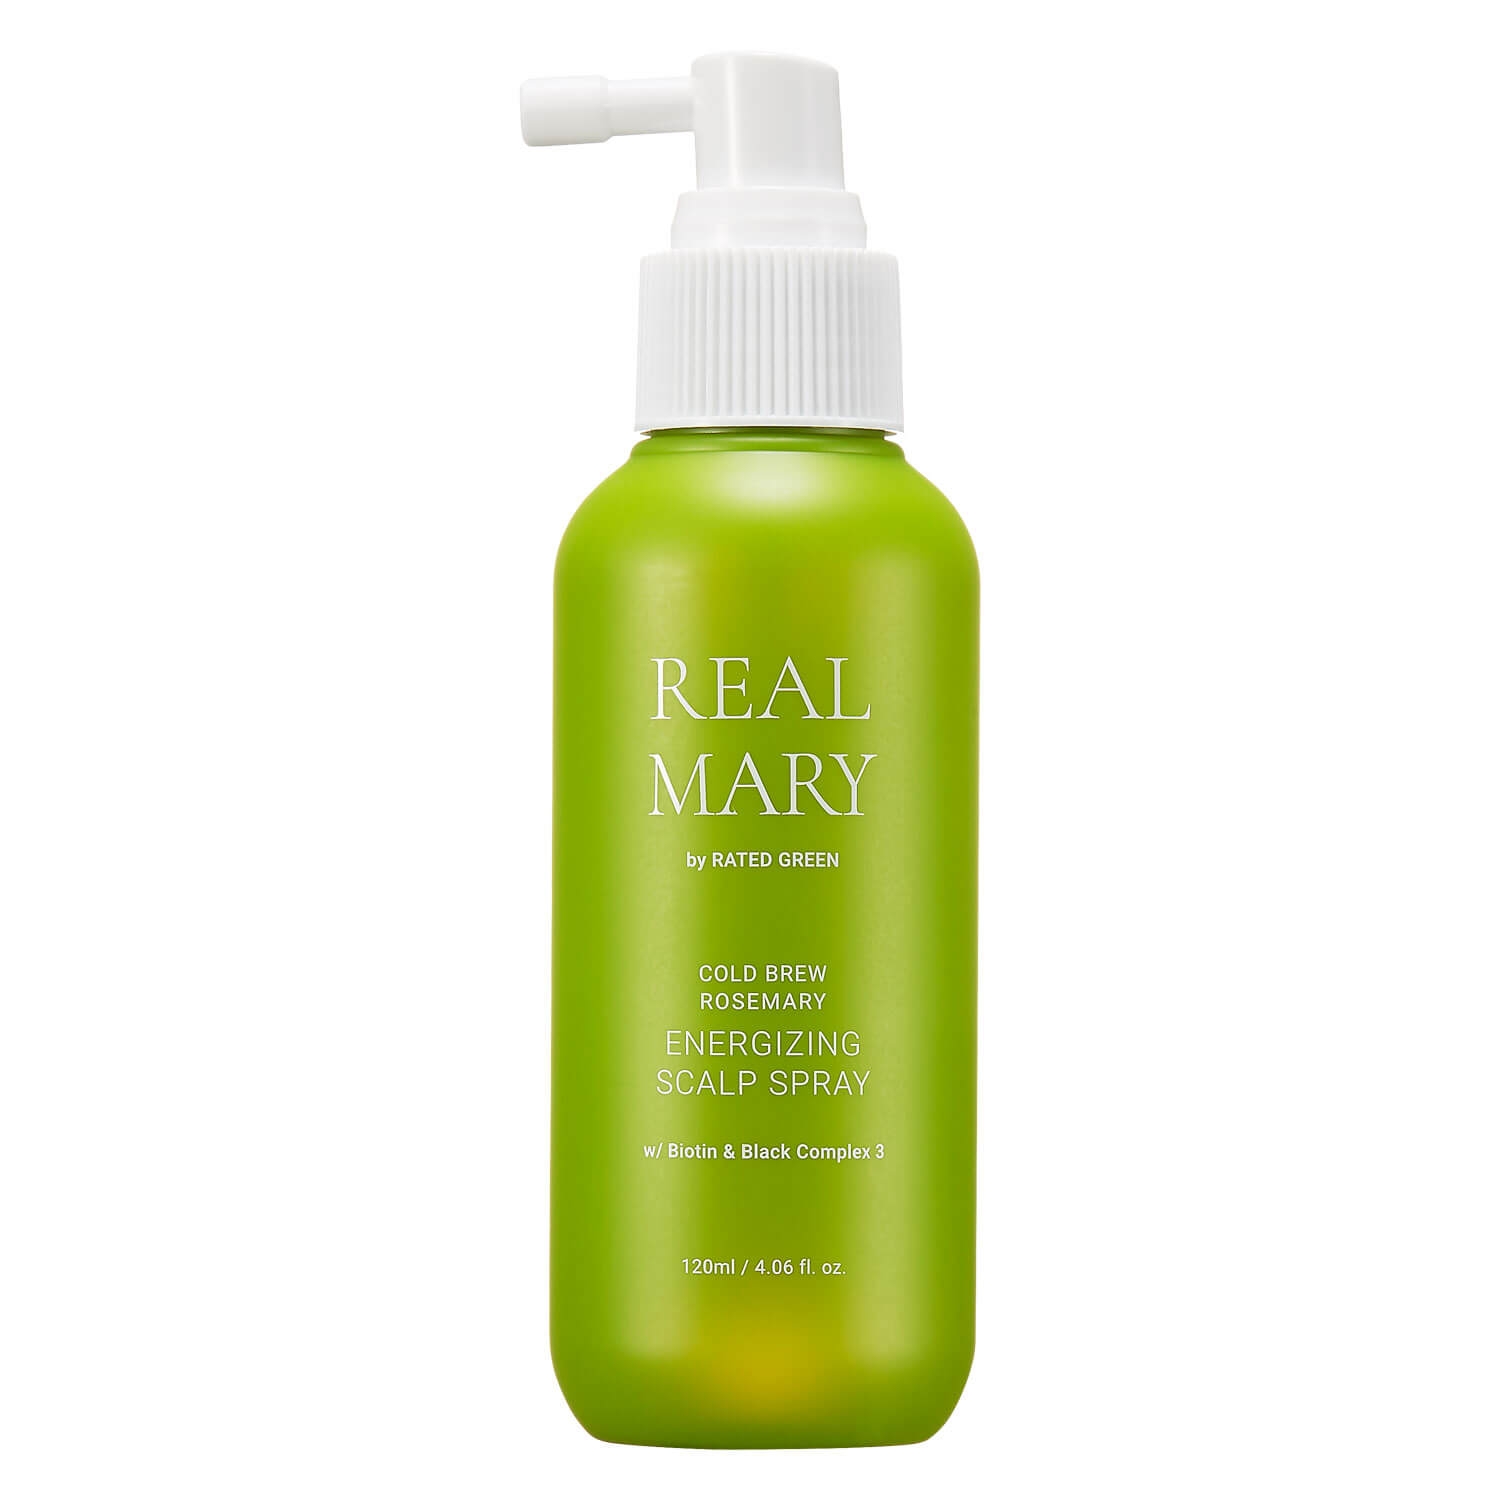 Produktbild von RATED GREEN - Real Mary Energizing Scalp Spray